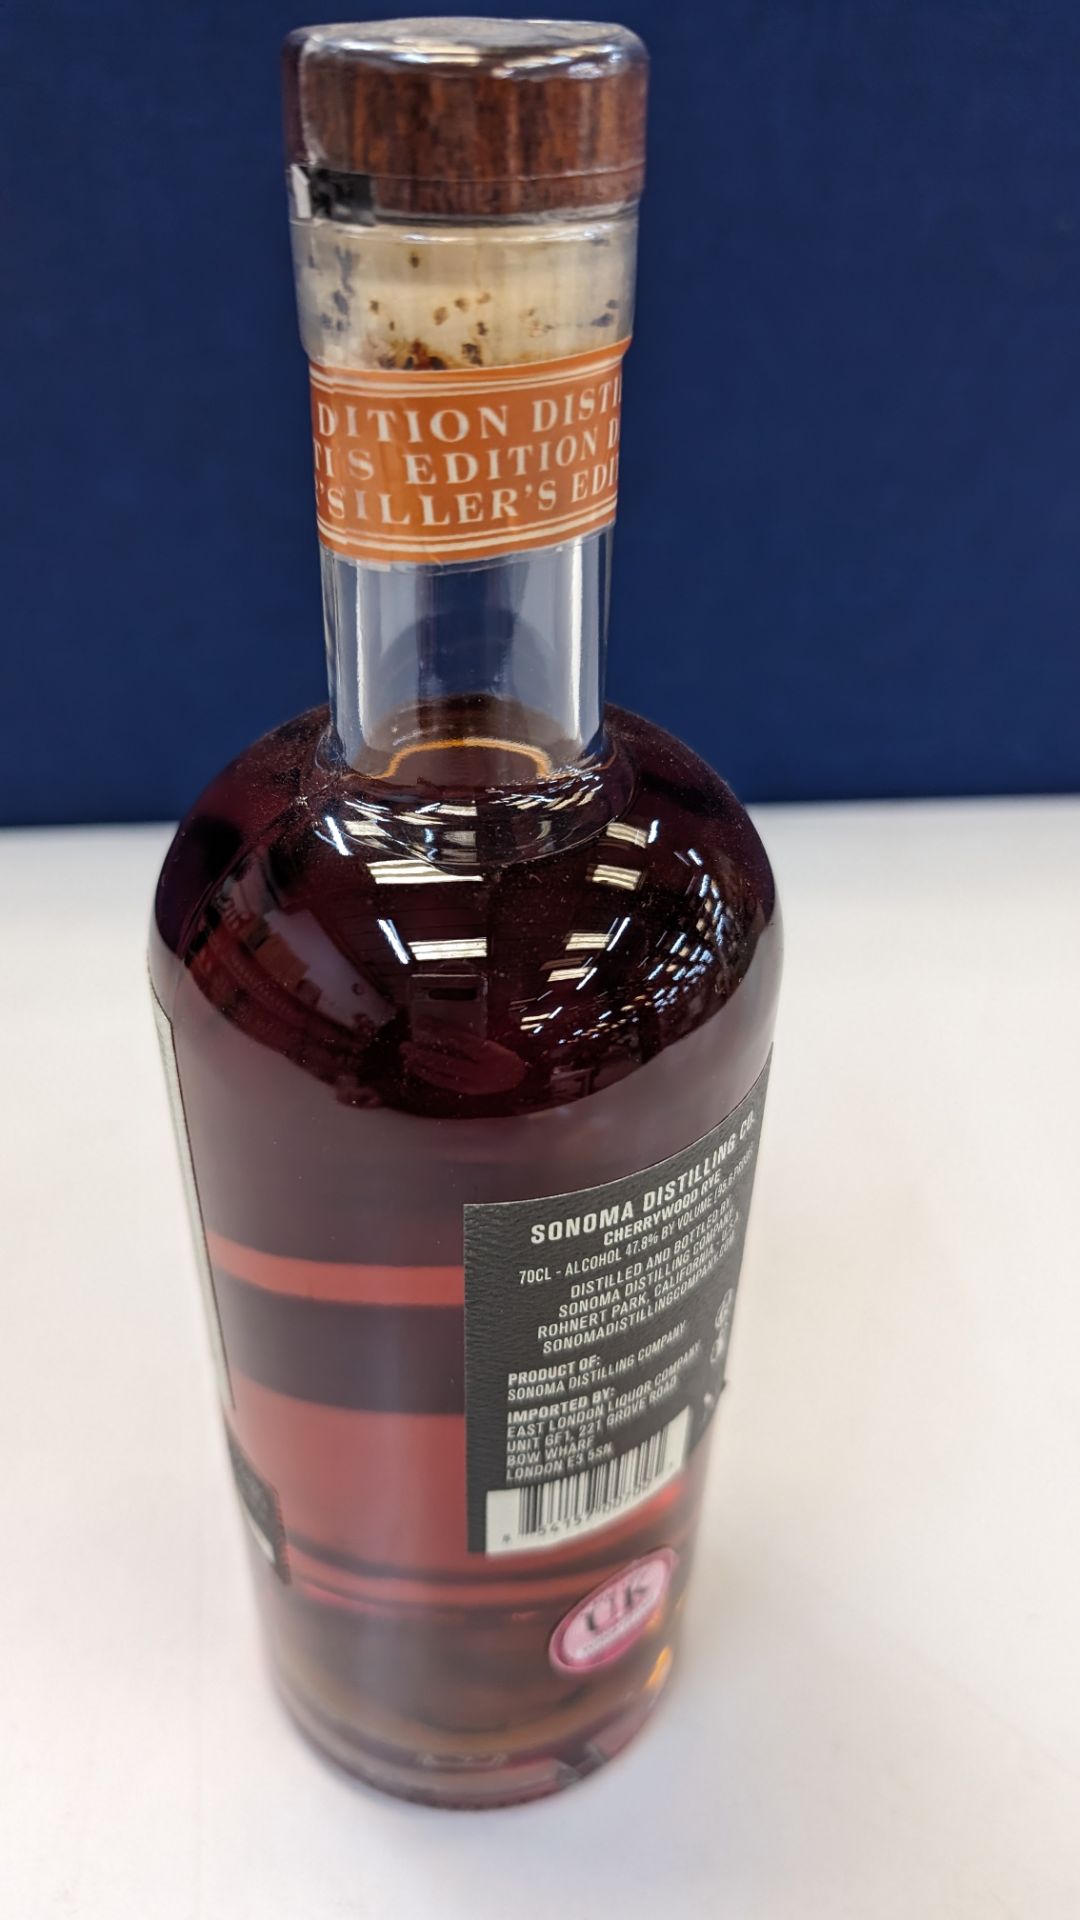 1 off 700ml bottle of Sonoma Cherrywood Rye Whiskey. 47.8% alc/vol (95.6 proof). Distilled and bot - Image 4 of 5